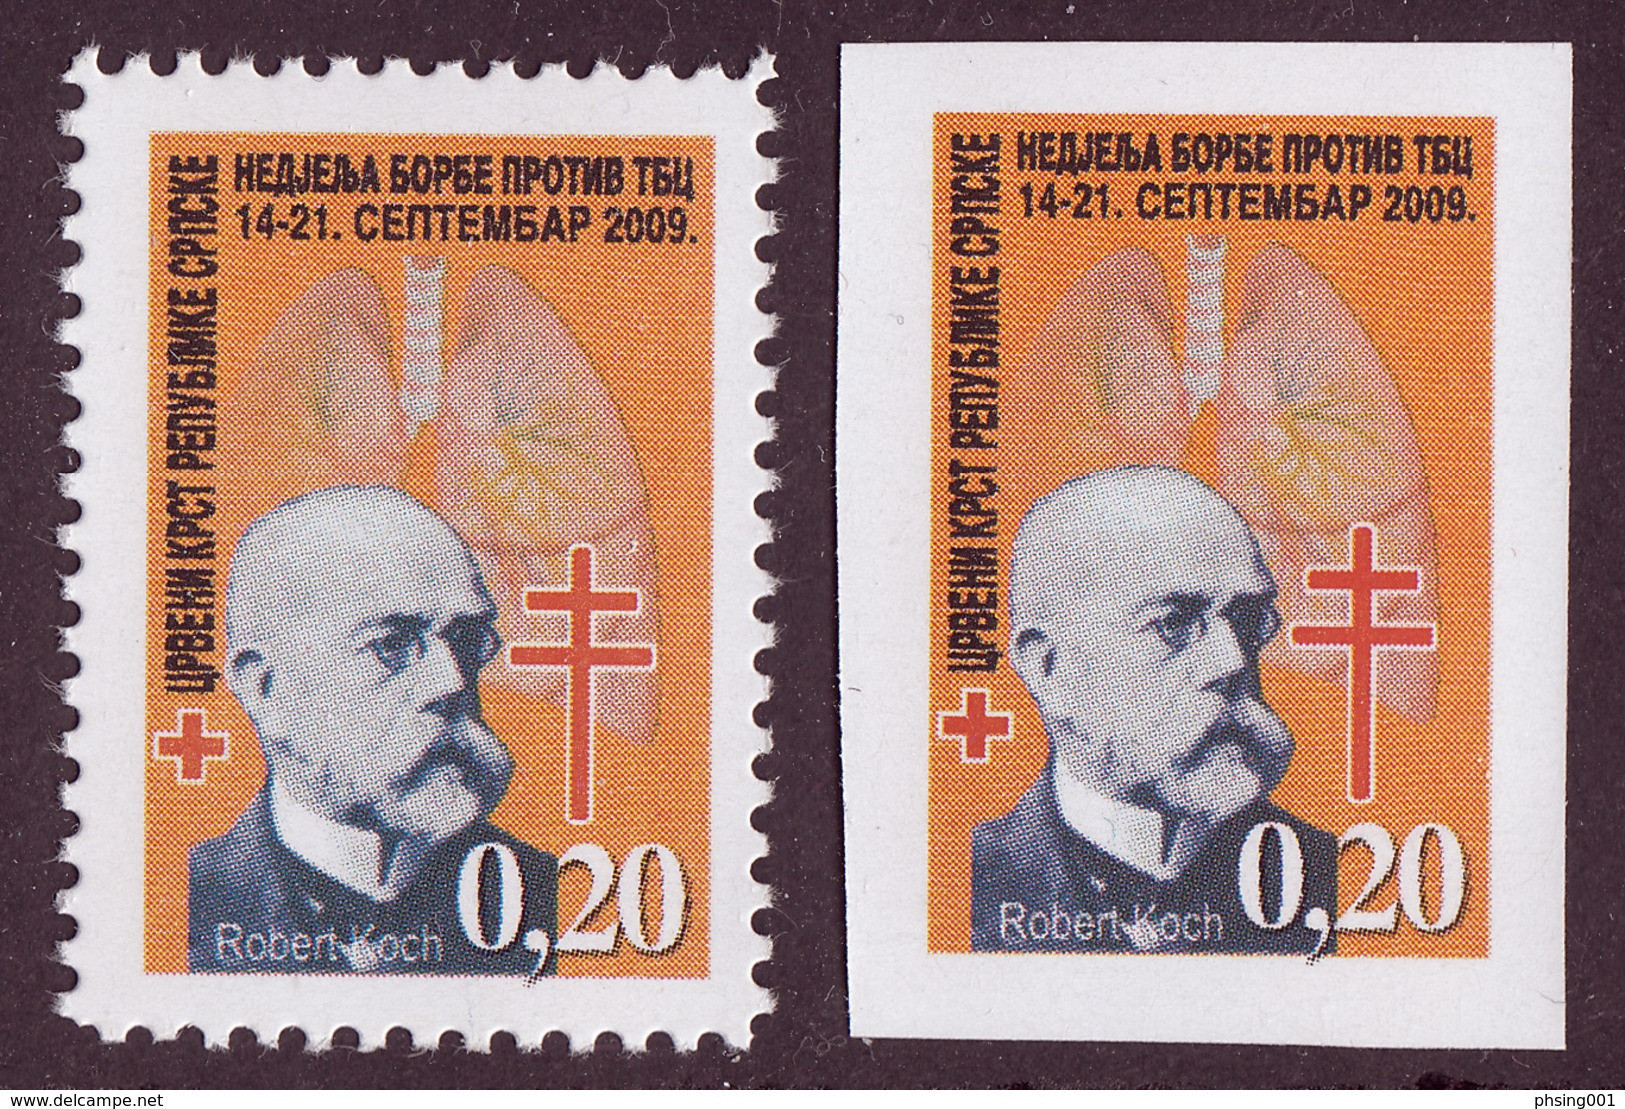 Bosnia Serbia 2009 TBC Tuberculosis Red Cross Robert Koch, Tax Charity Surcharge Stamps Perforated + Imperforated MNH - Bosnien-Herzegowina